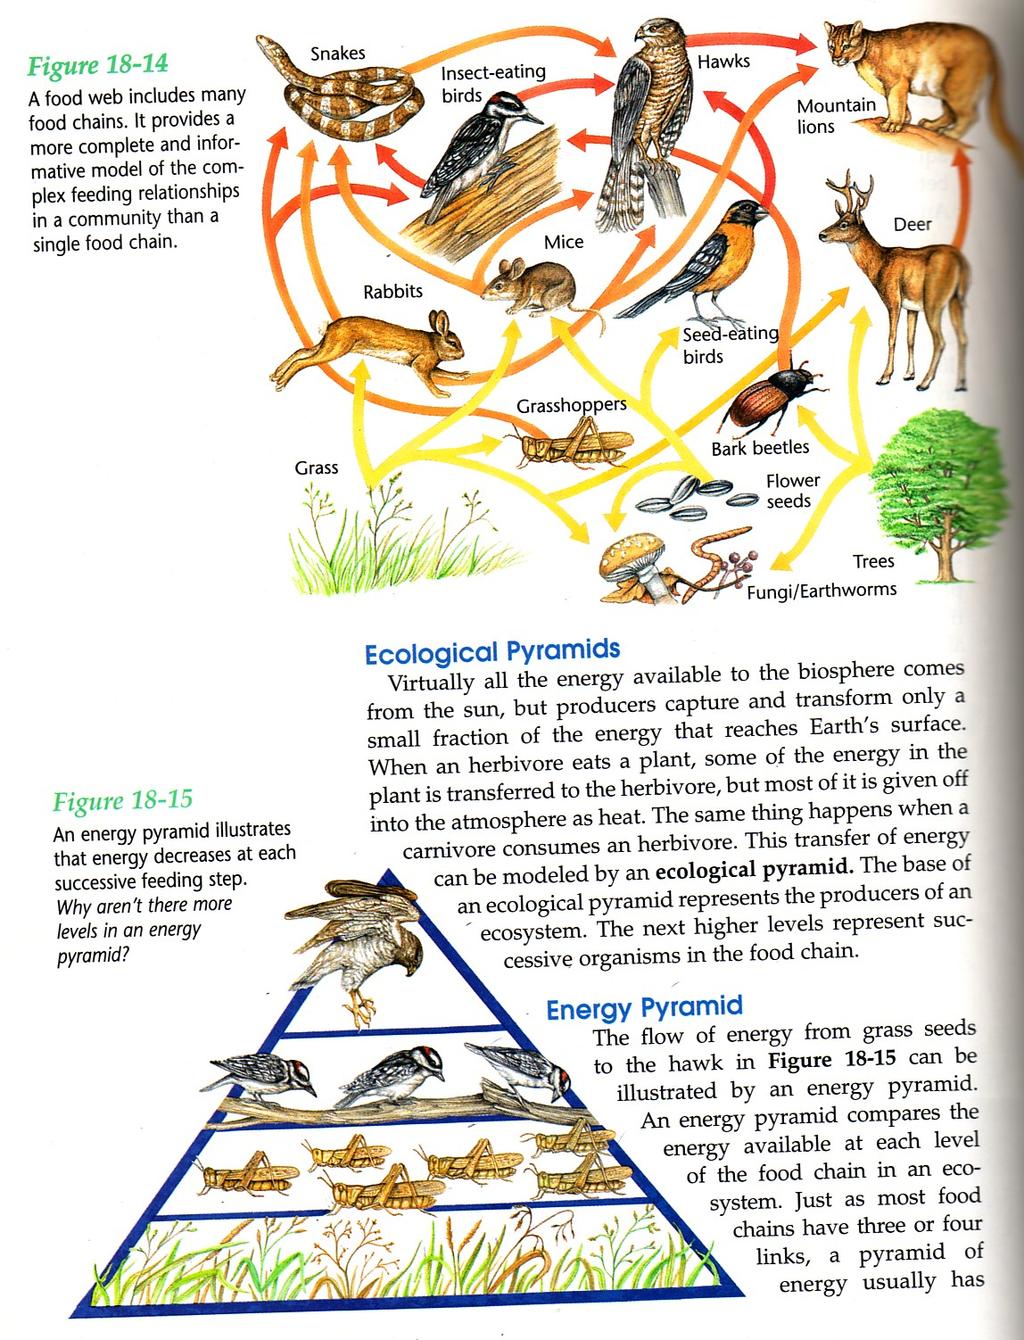 The triangle at right shows an Energy Pyramid (also called an Ecological Pyramid) consis8ng of the following organisms: hawk, thrushes, grasshoppers, and